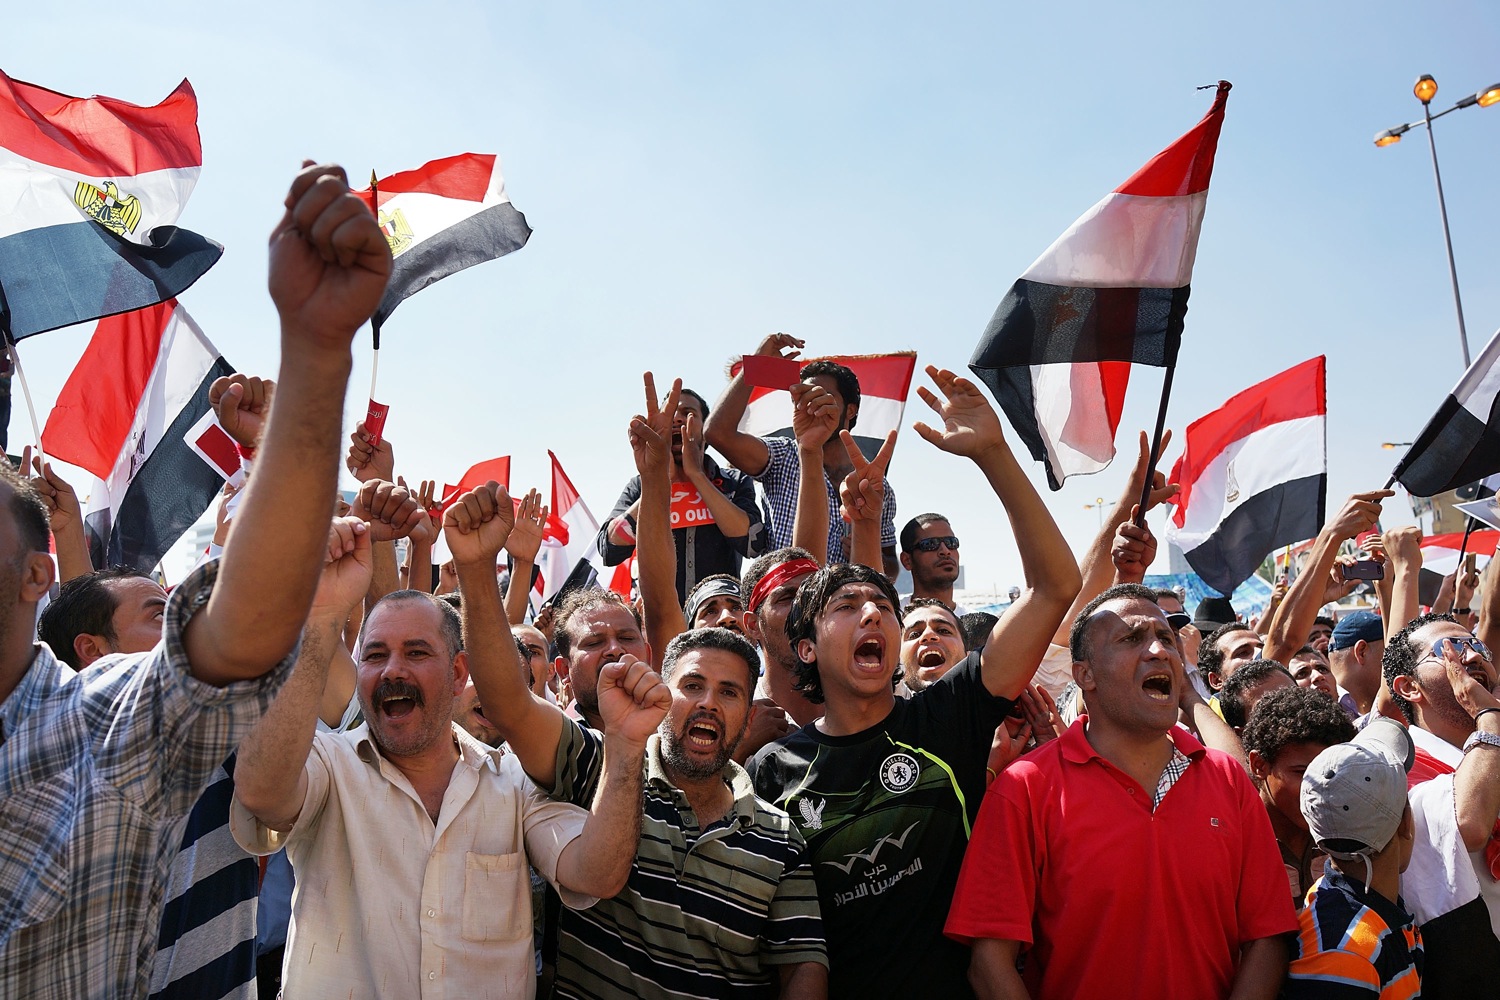 Egypt Protsts Intensify As Army Deadline Approaches